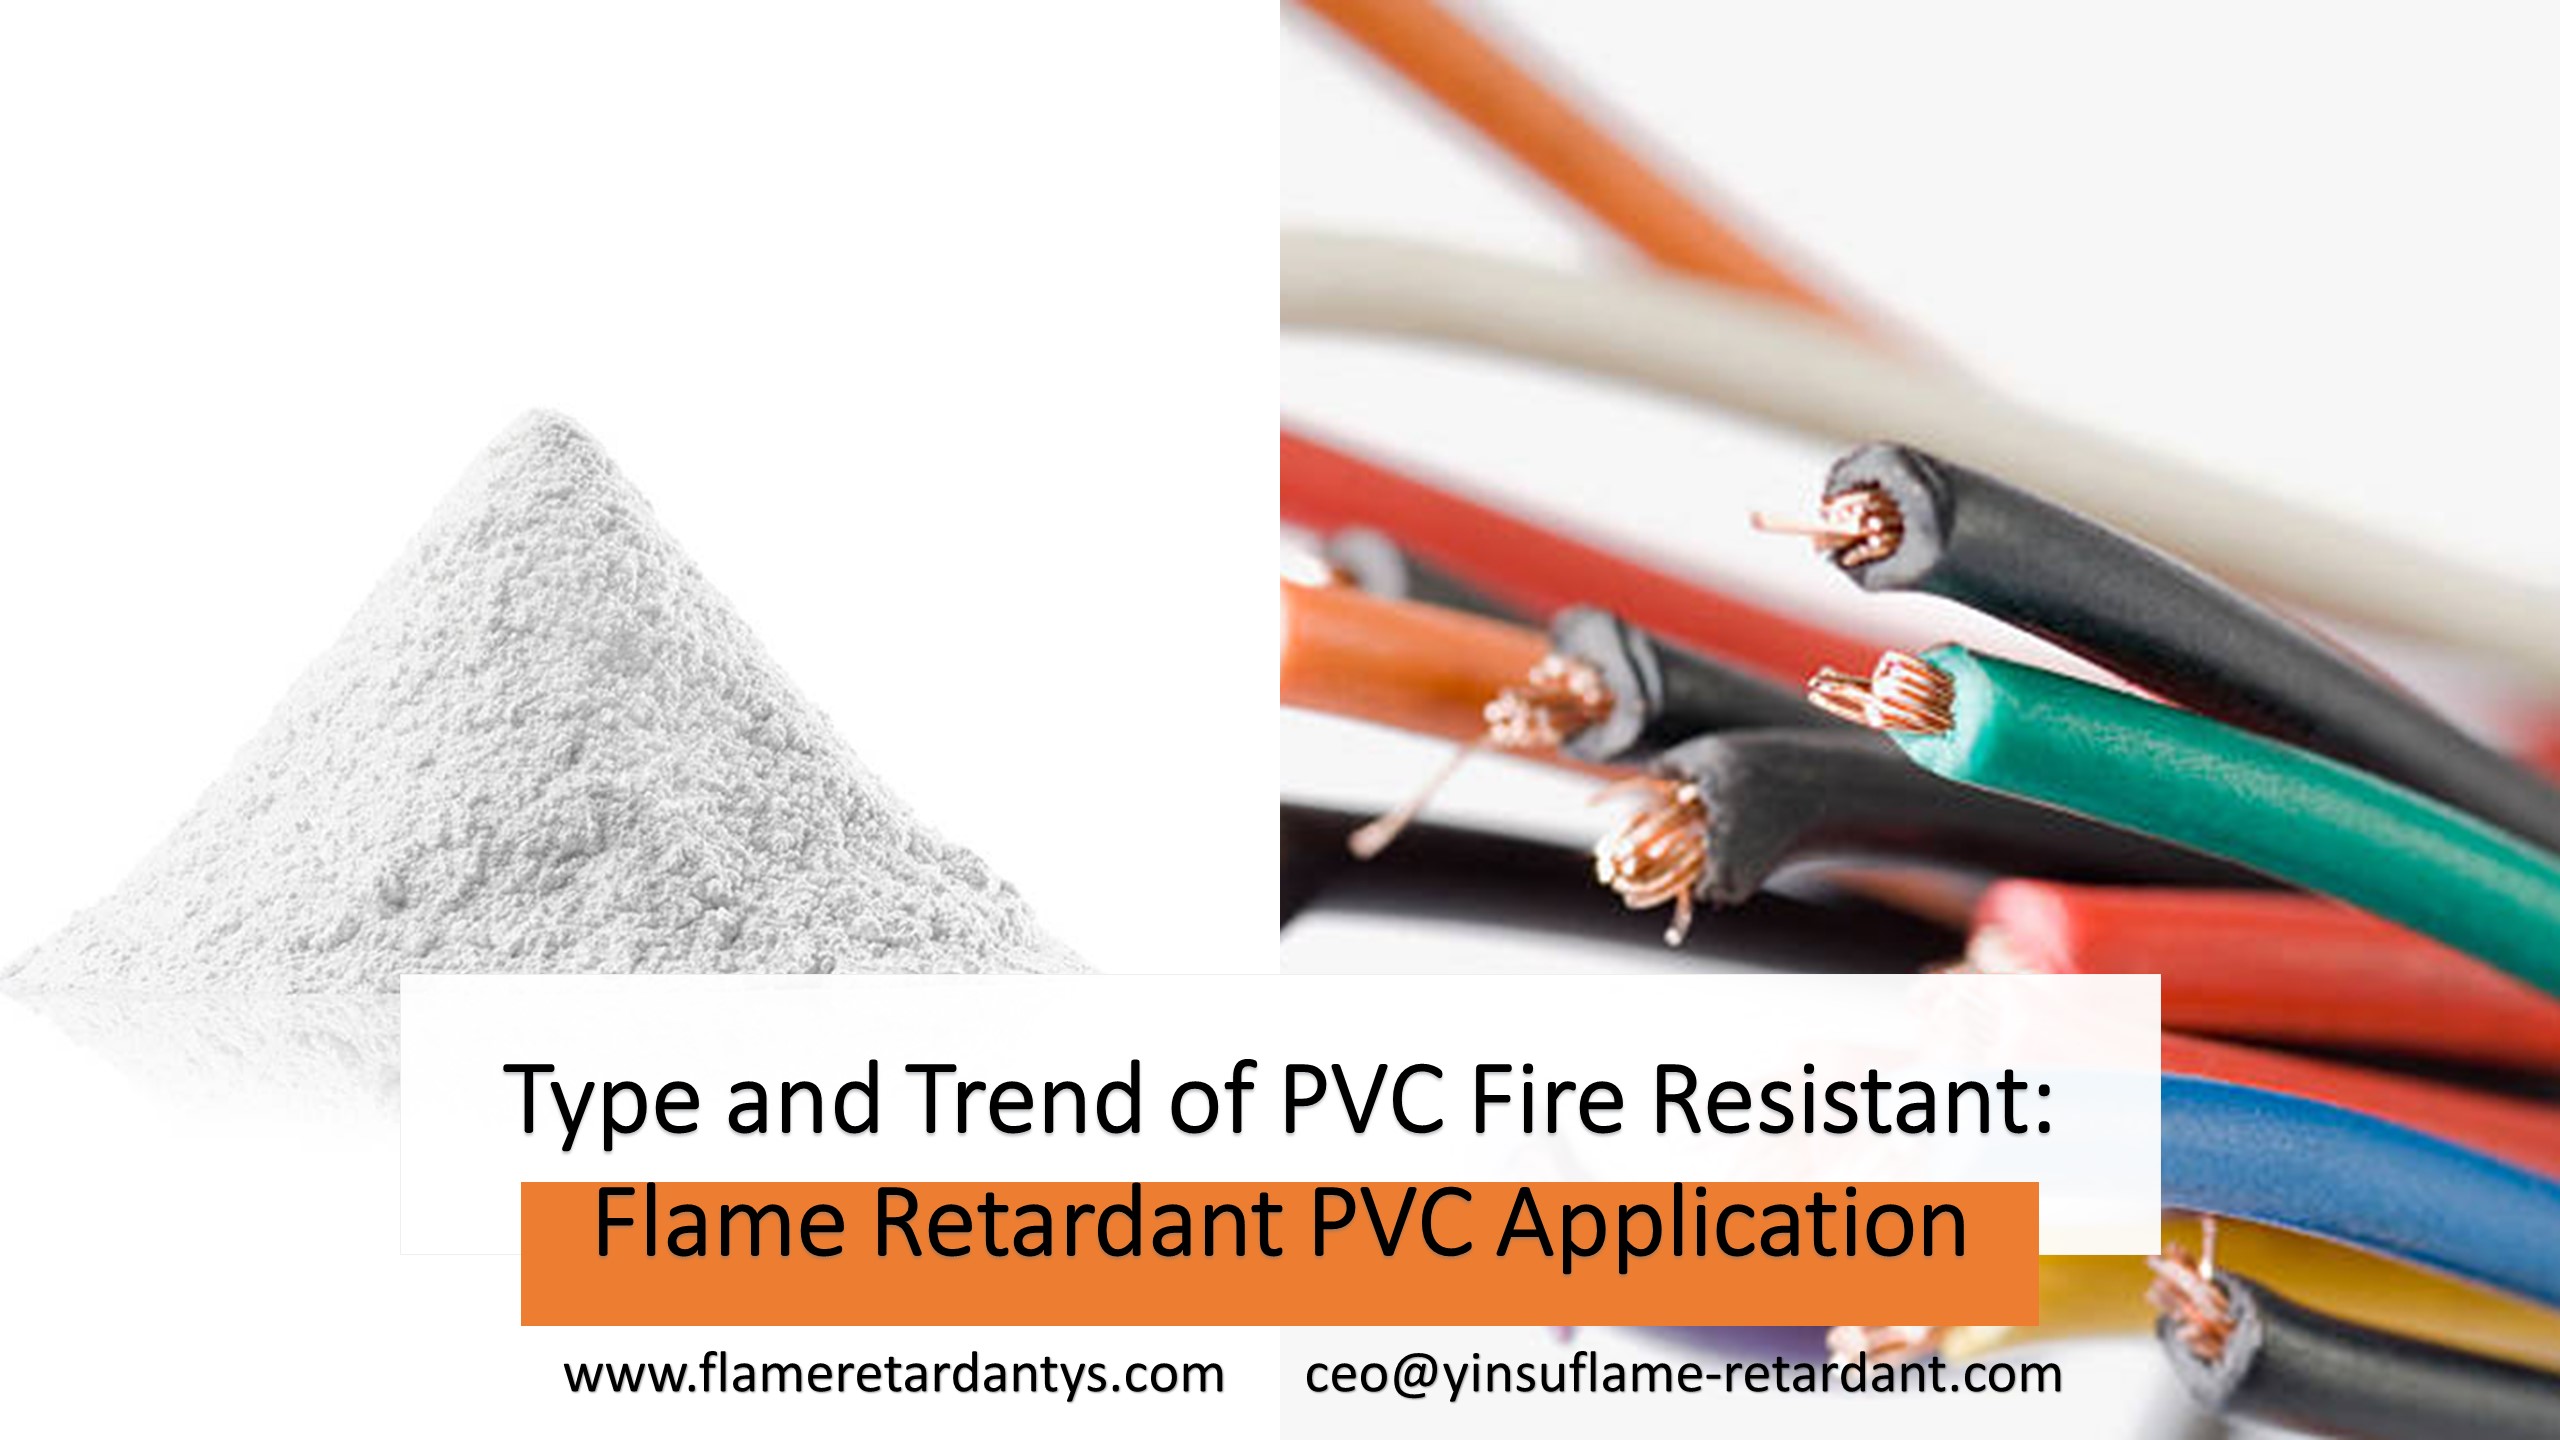 Type And Trend of PVC Fire Resistant: Flame Retardant PVC Application Introduction